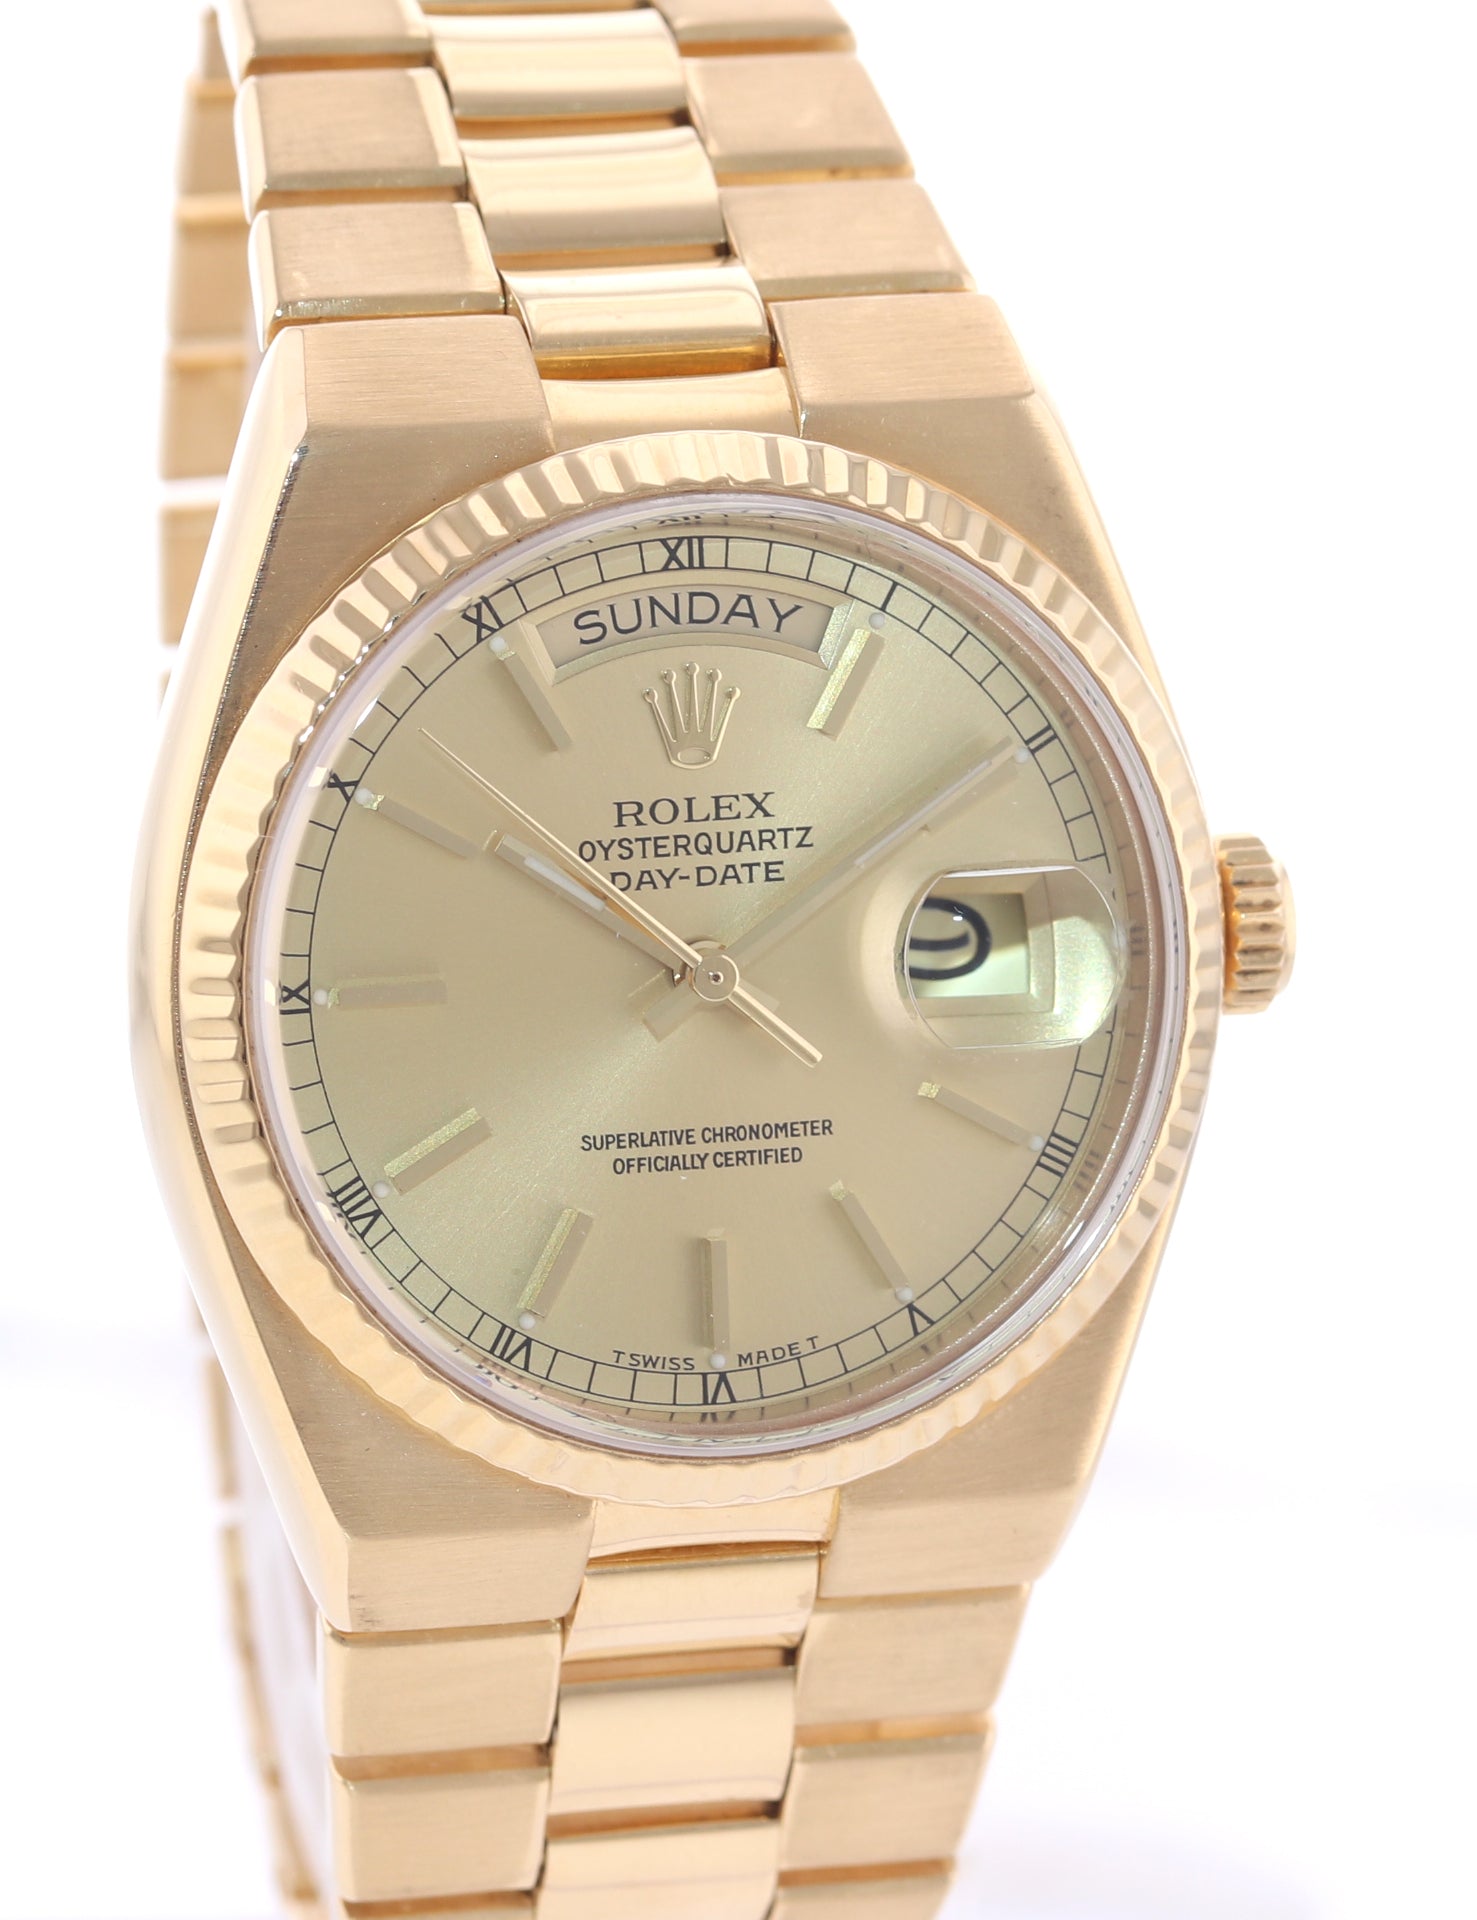 Rolex OysterQuartz Day Date President 19018 Solid 18k Yellow Gold Watch Box